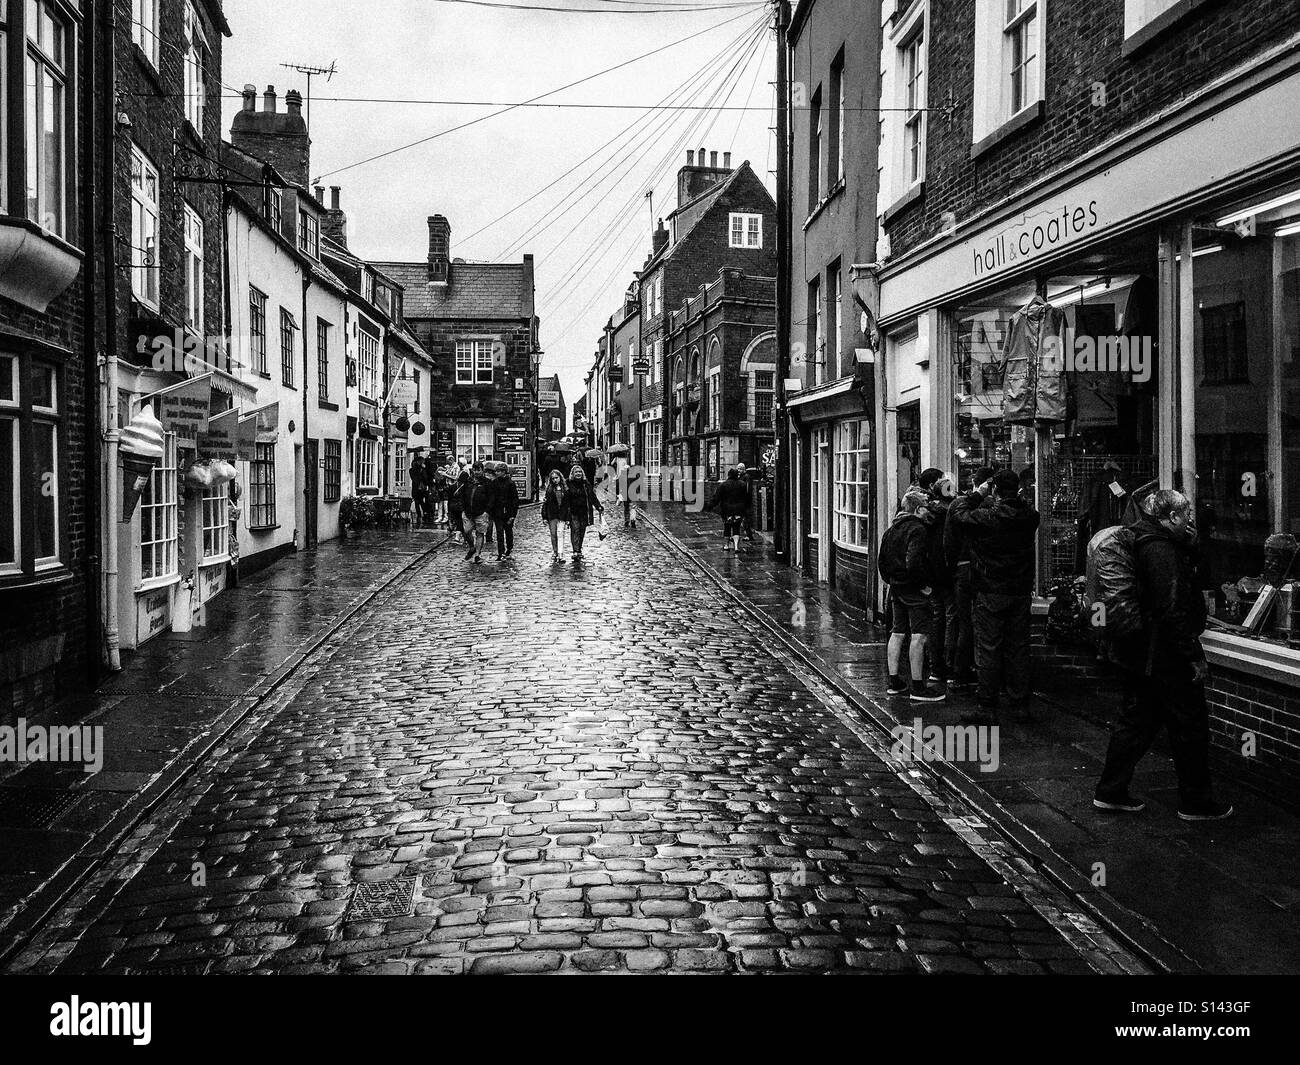 Church Street in Whitby. Wet cobblestones and people. Stock Photo